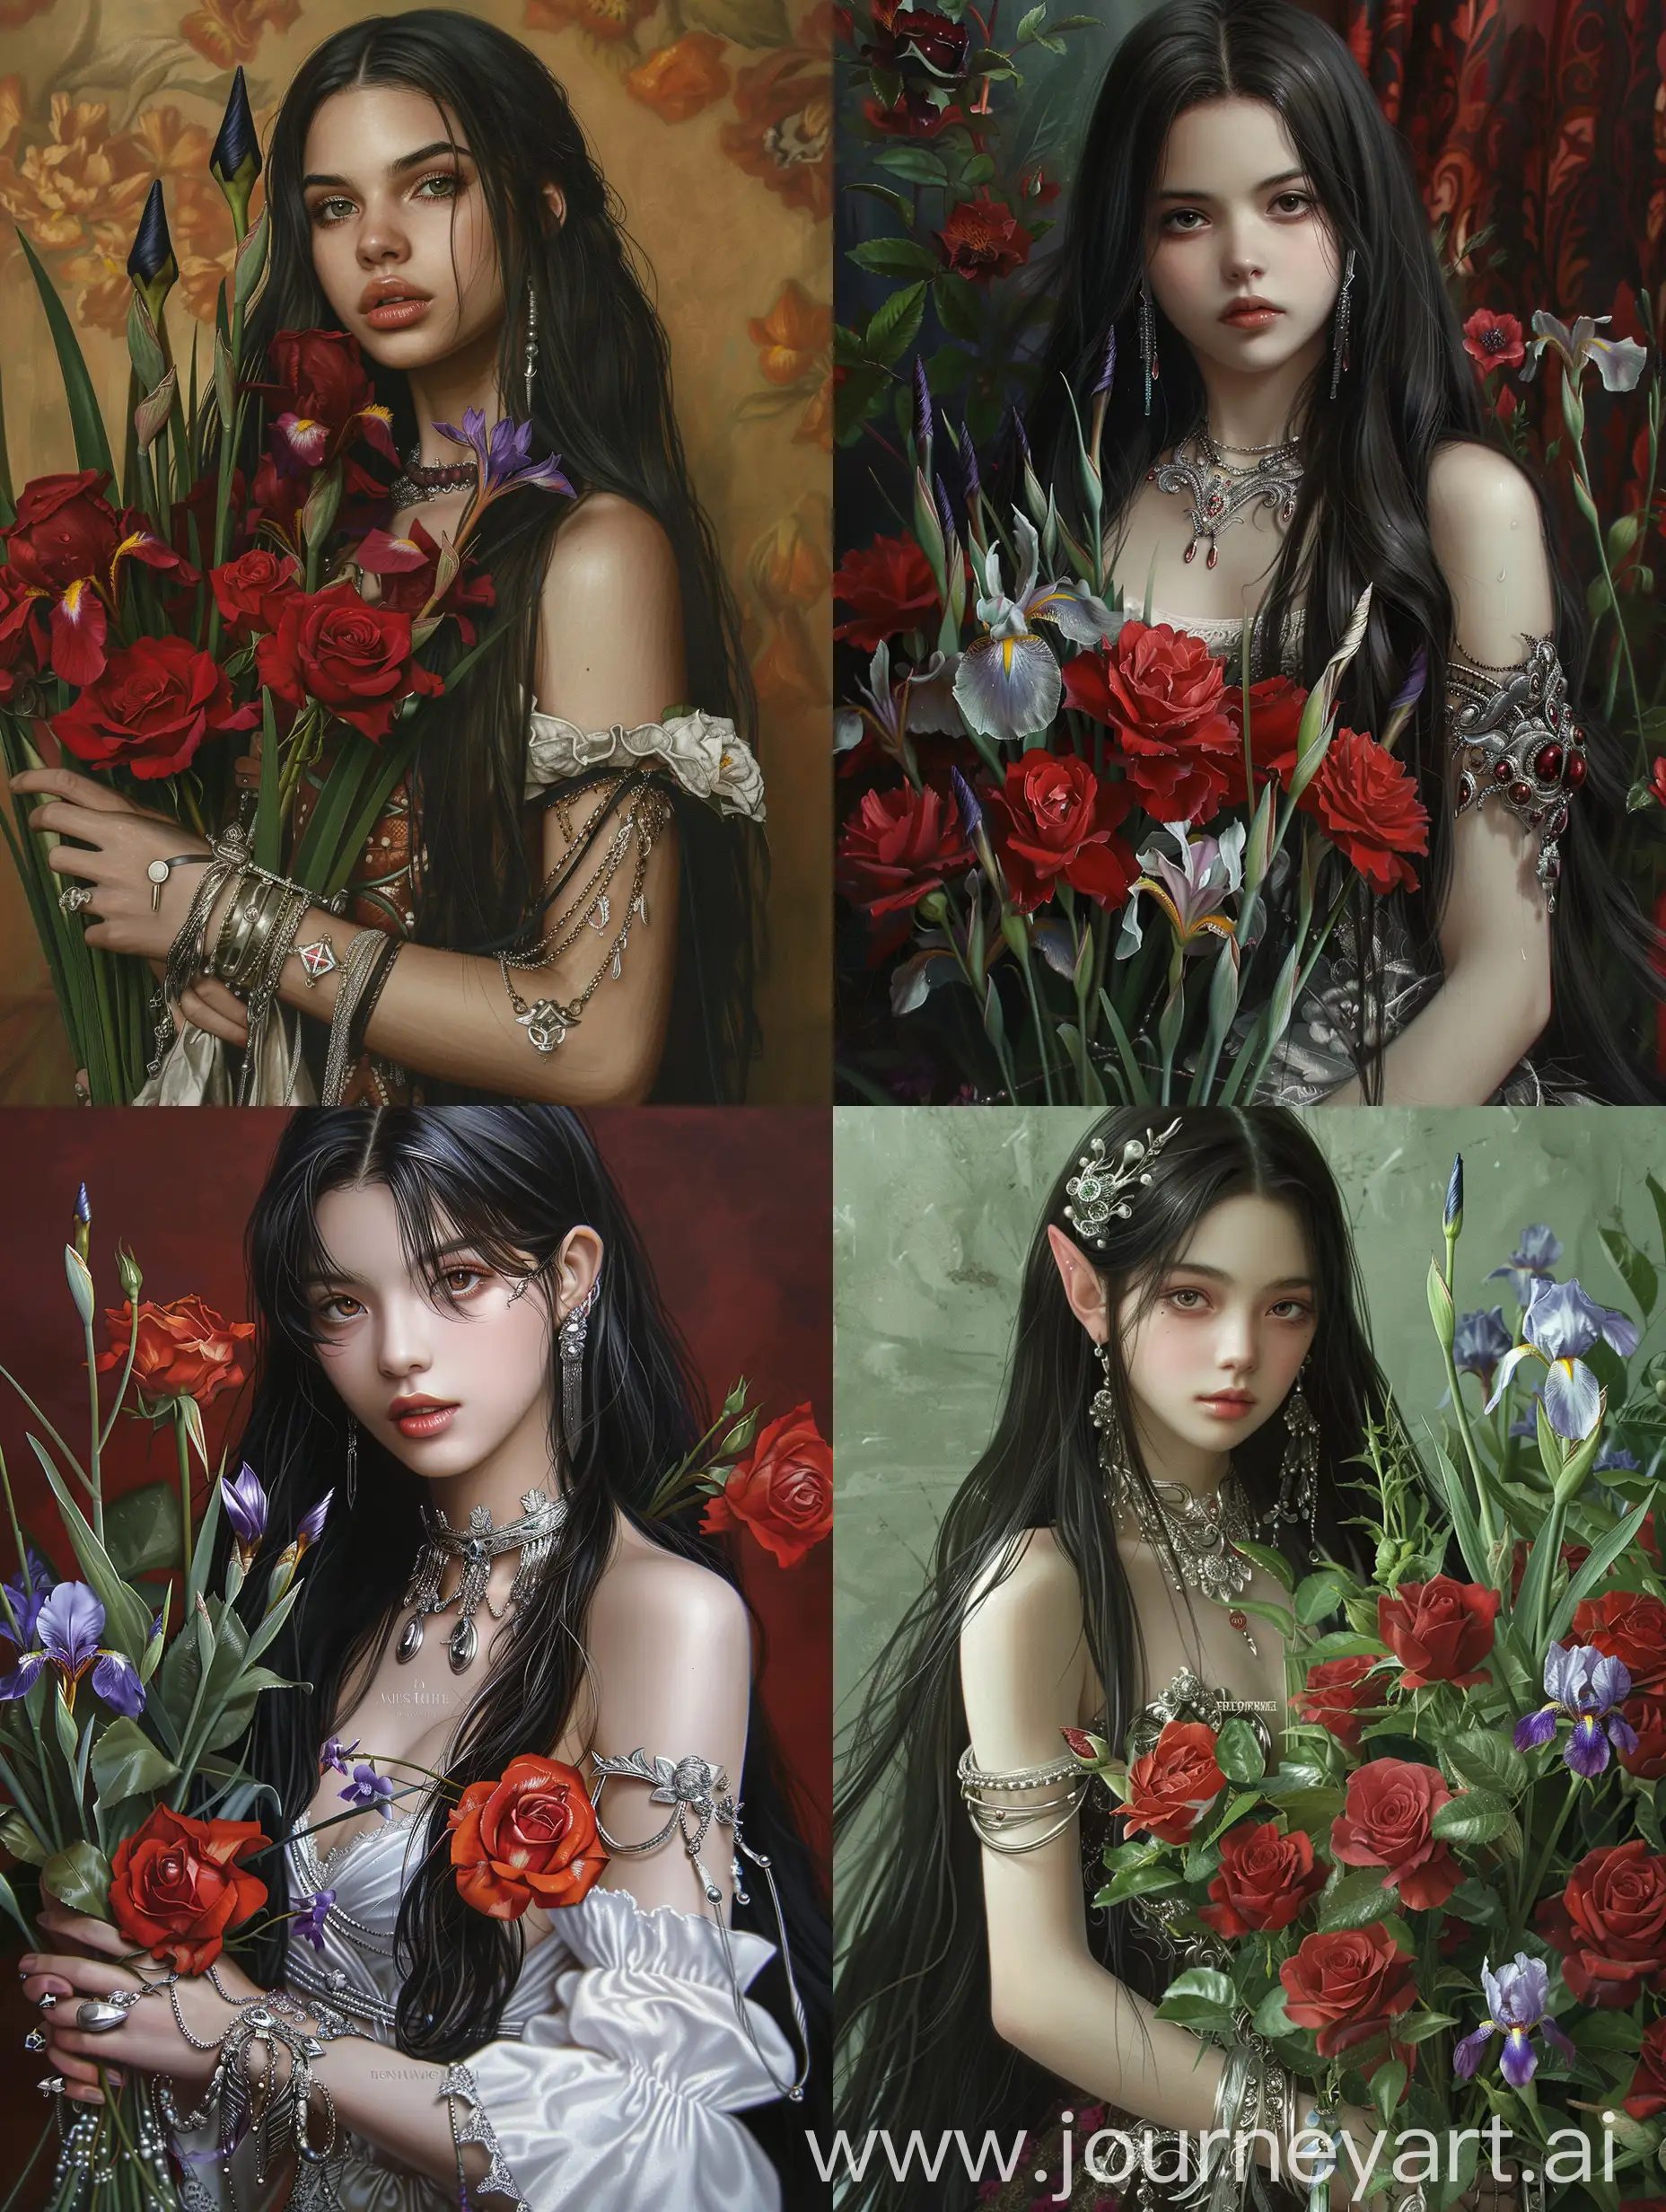 Elegant-Youth-with-Long-Black-Hair-and-Silver-Jewelry-Holding-Red-Roses-and-Irises-Bouquet